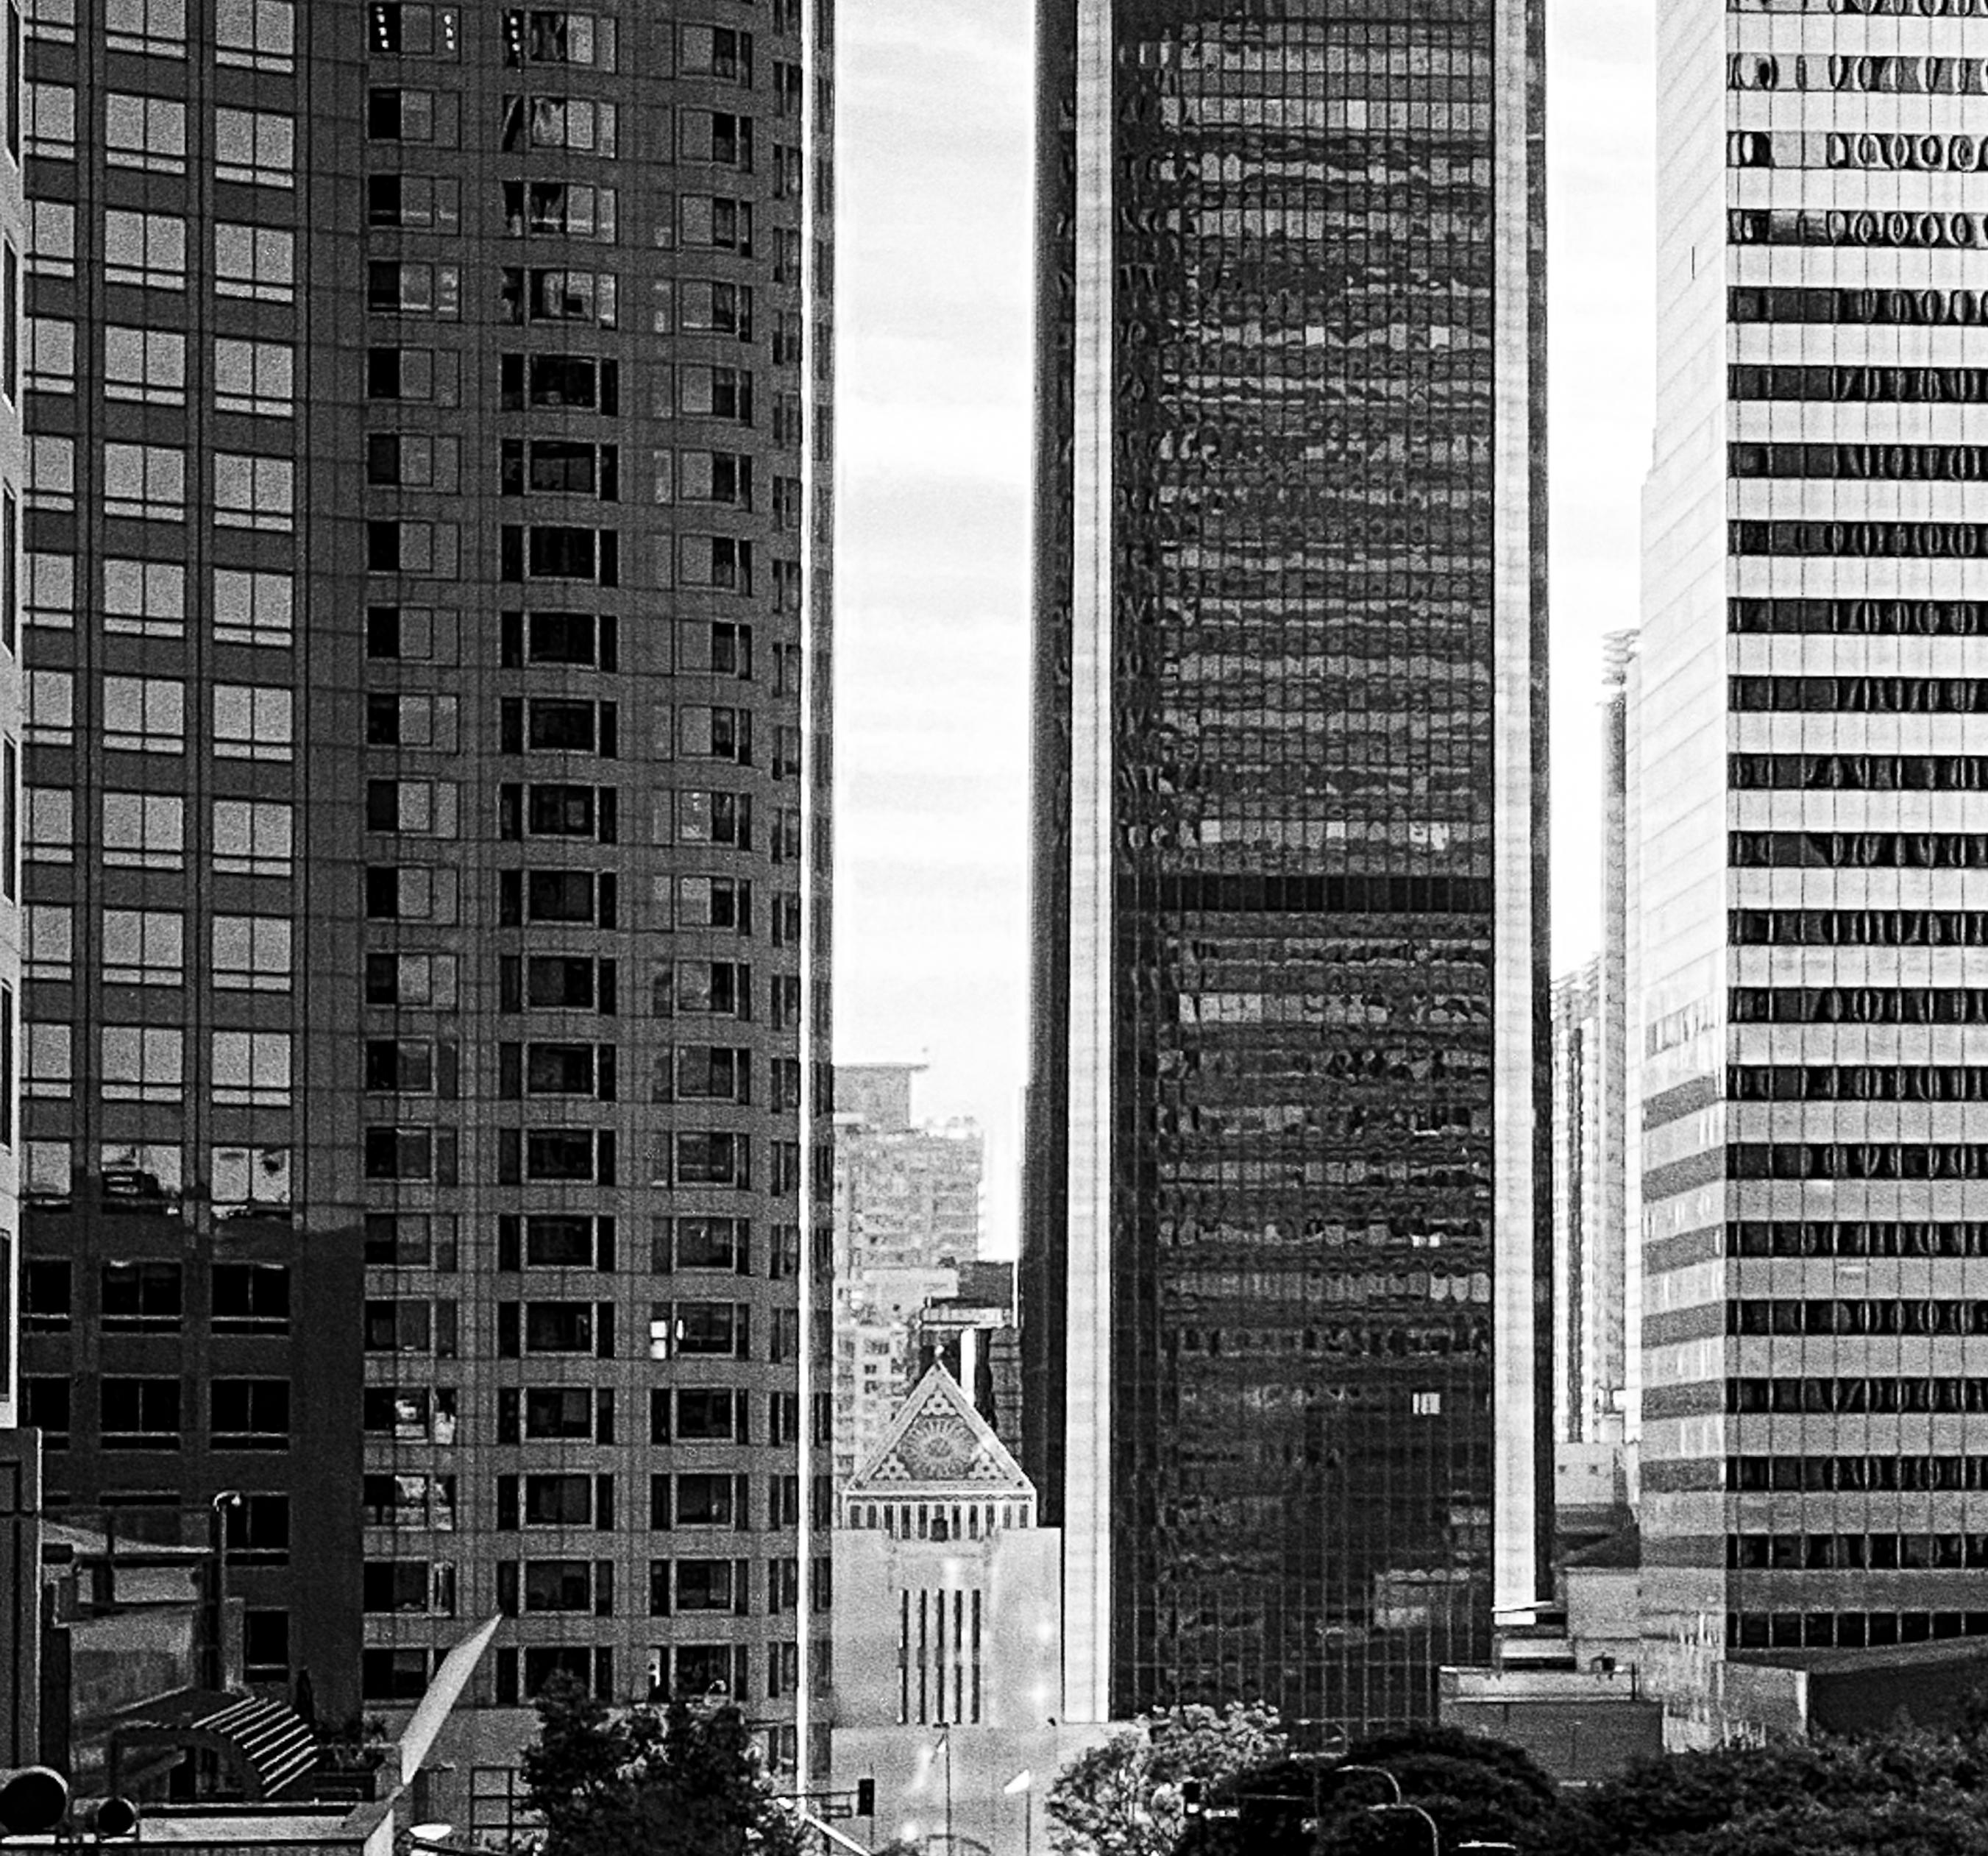 Black and white urban landscape.  The photograph is taken in Downtown, Los Angeles.

Original gallery quality archival pigment print on archival paper signed by the artist.
Limited edition of 6
Paper size: 24